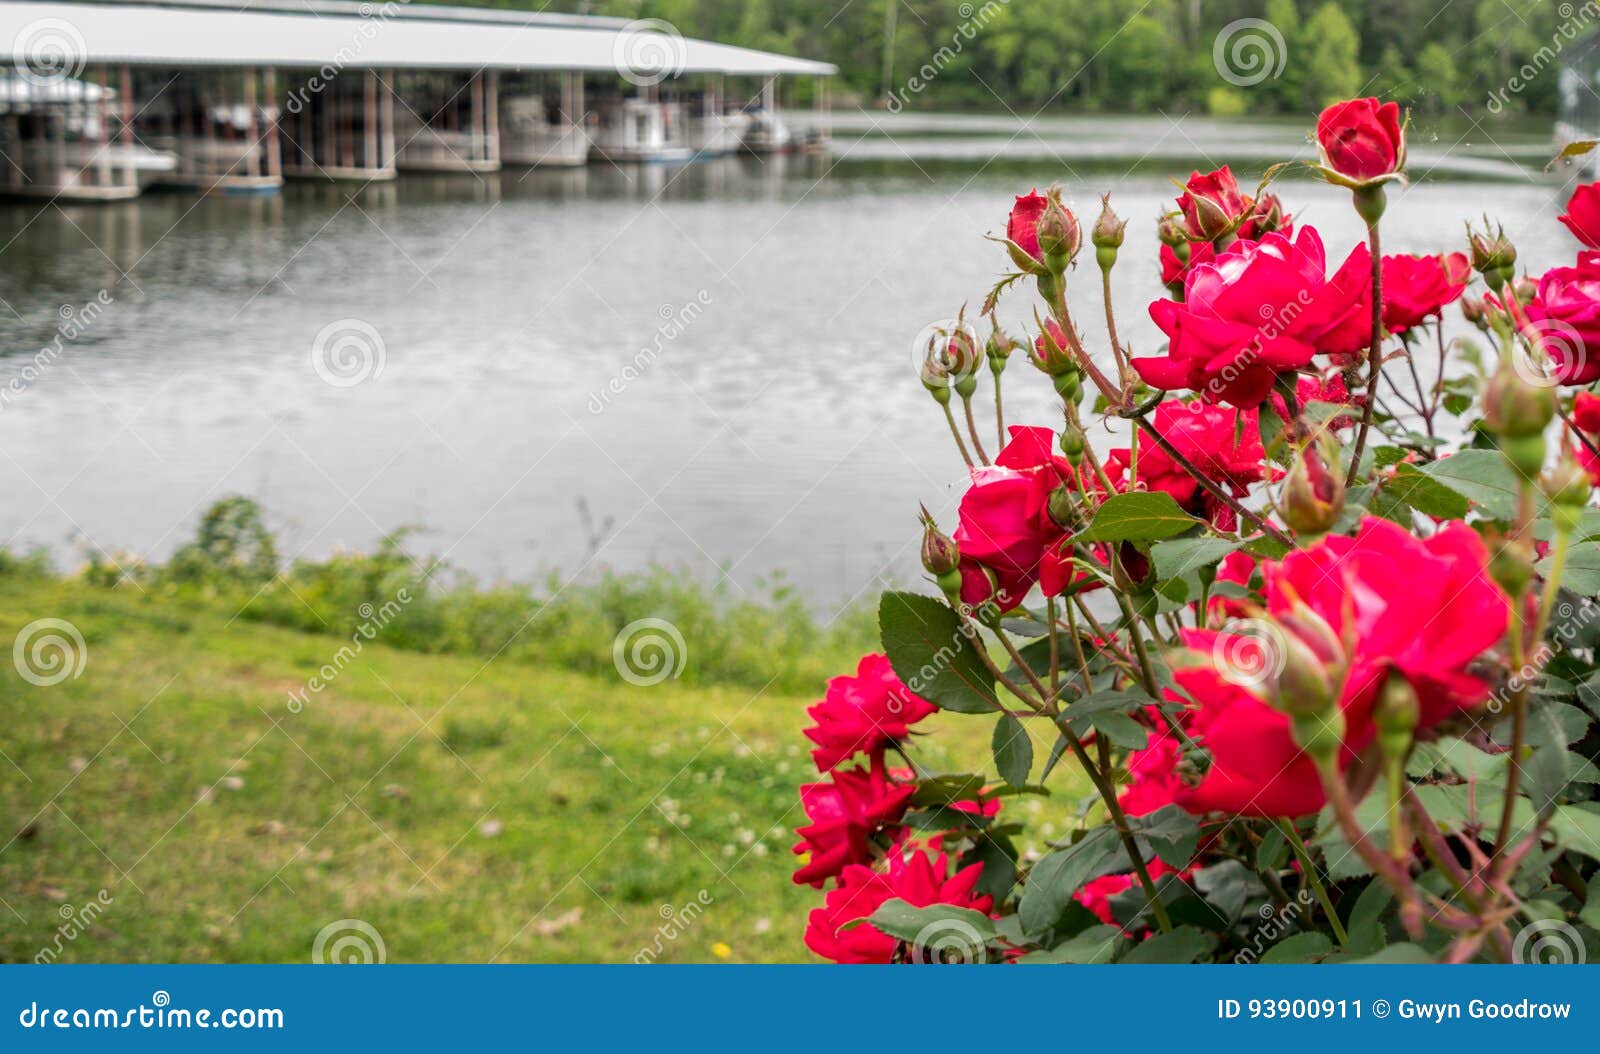 Red Roses At Marina With Boats In Background Stock Image Image